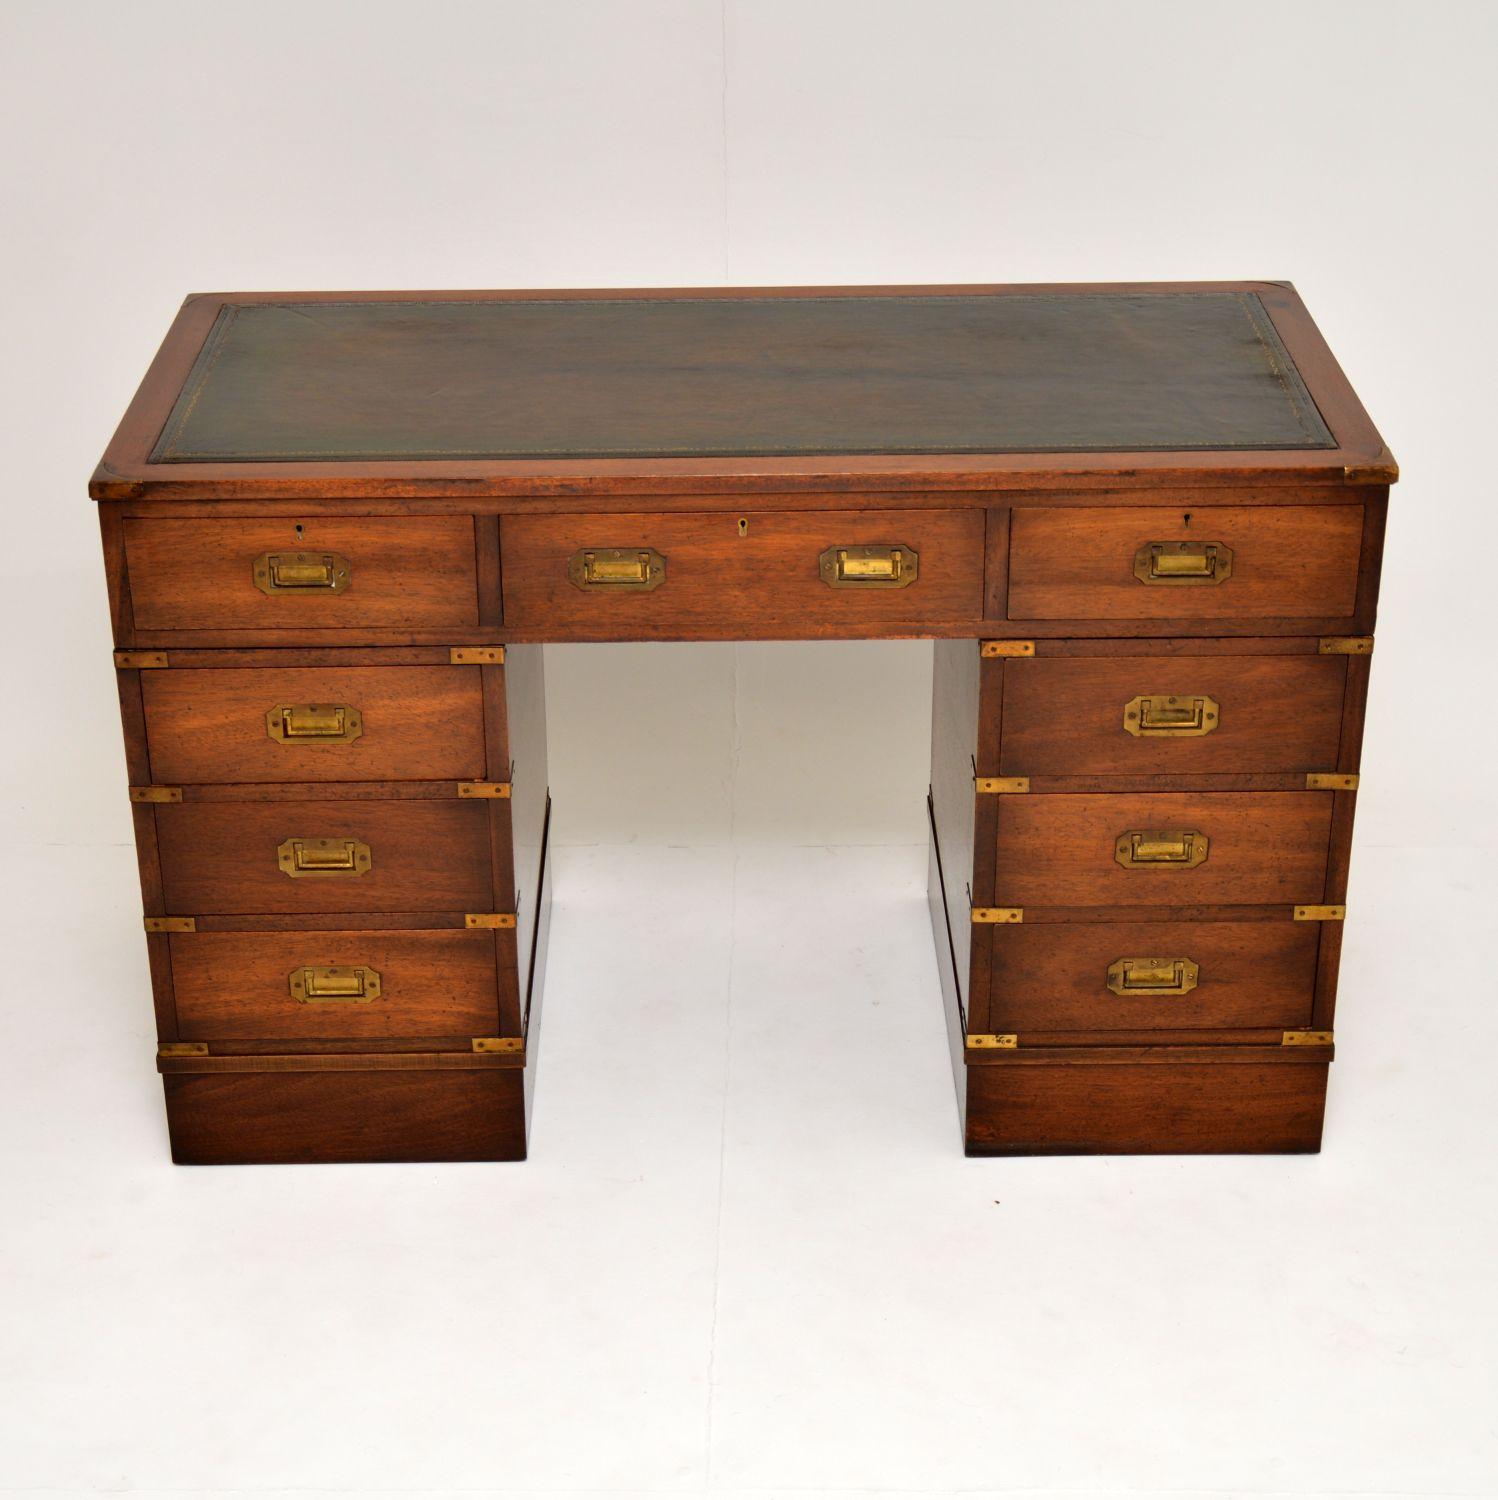 Antique Campaign style mahogany pedestal desk in excellent condition and with lots of character.

It has a tooled leather writing surface, a polished back and sits on bold plinth bases. The drawers have inset brass military handles and there are